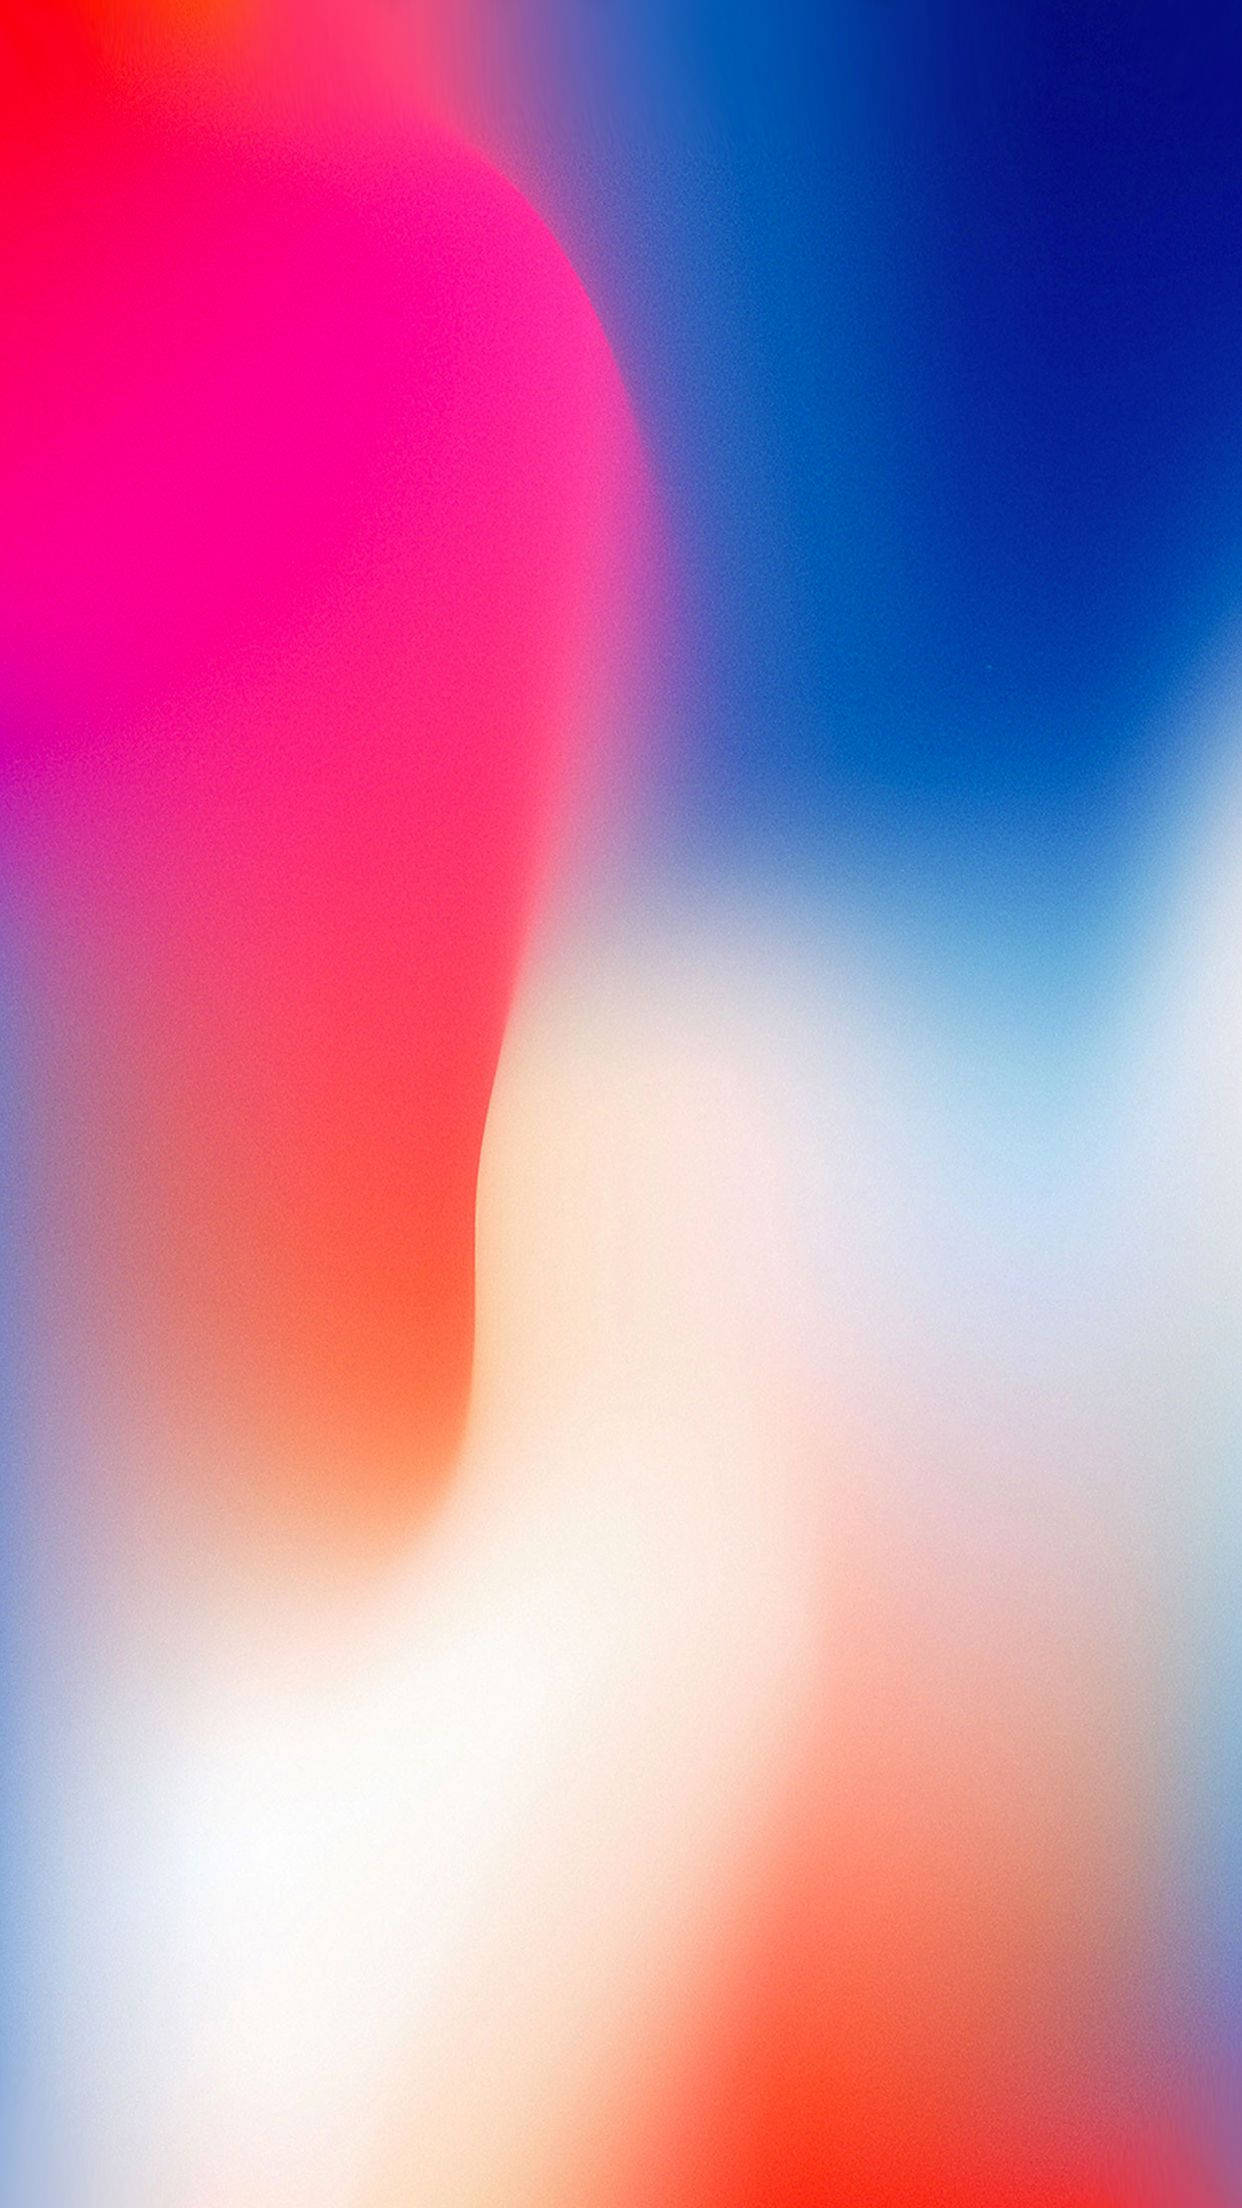 Bright Colors Abstract Iphone Digital Art Background